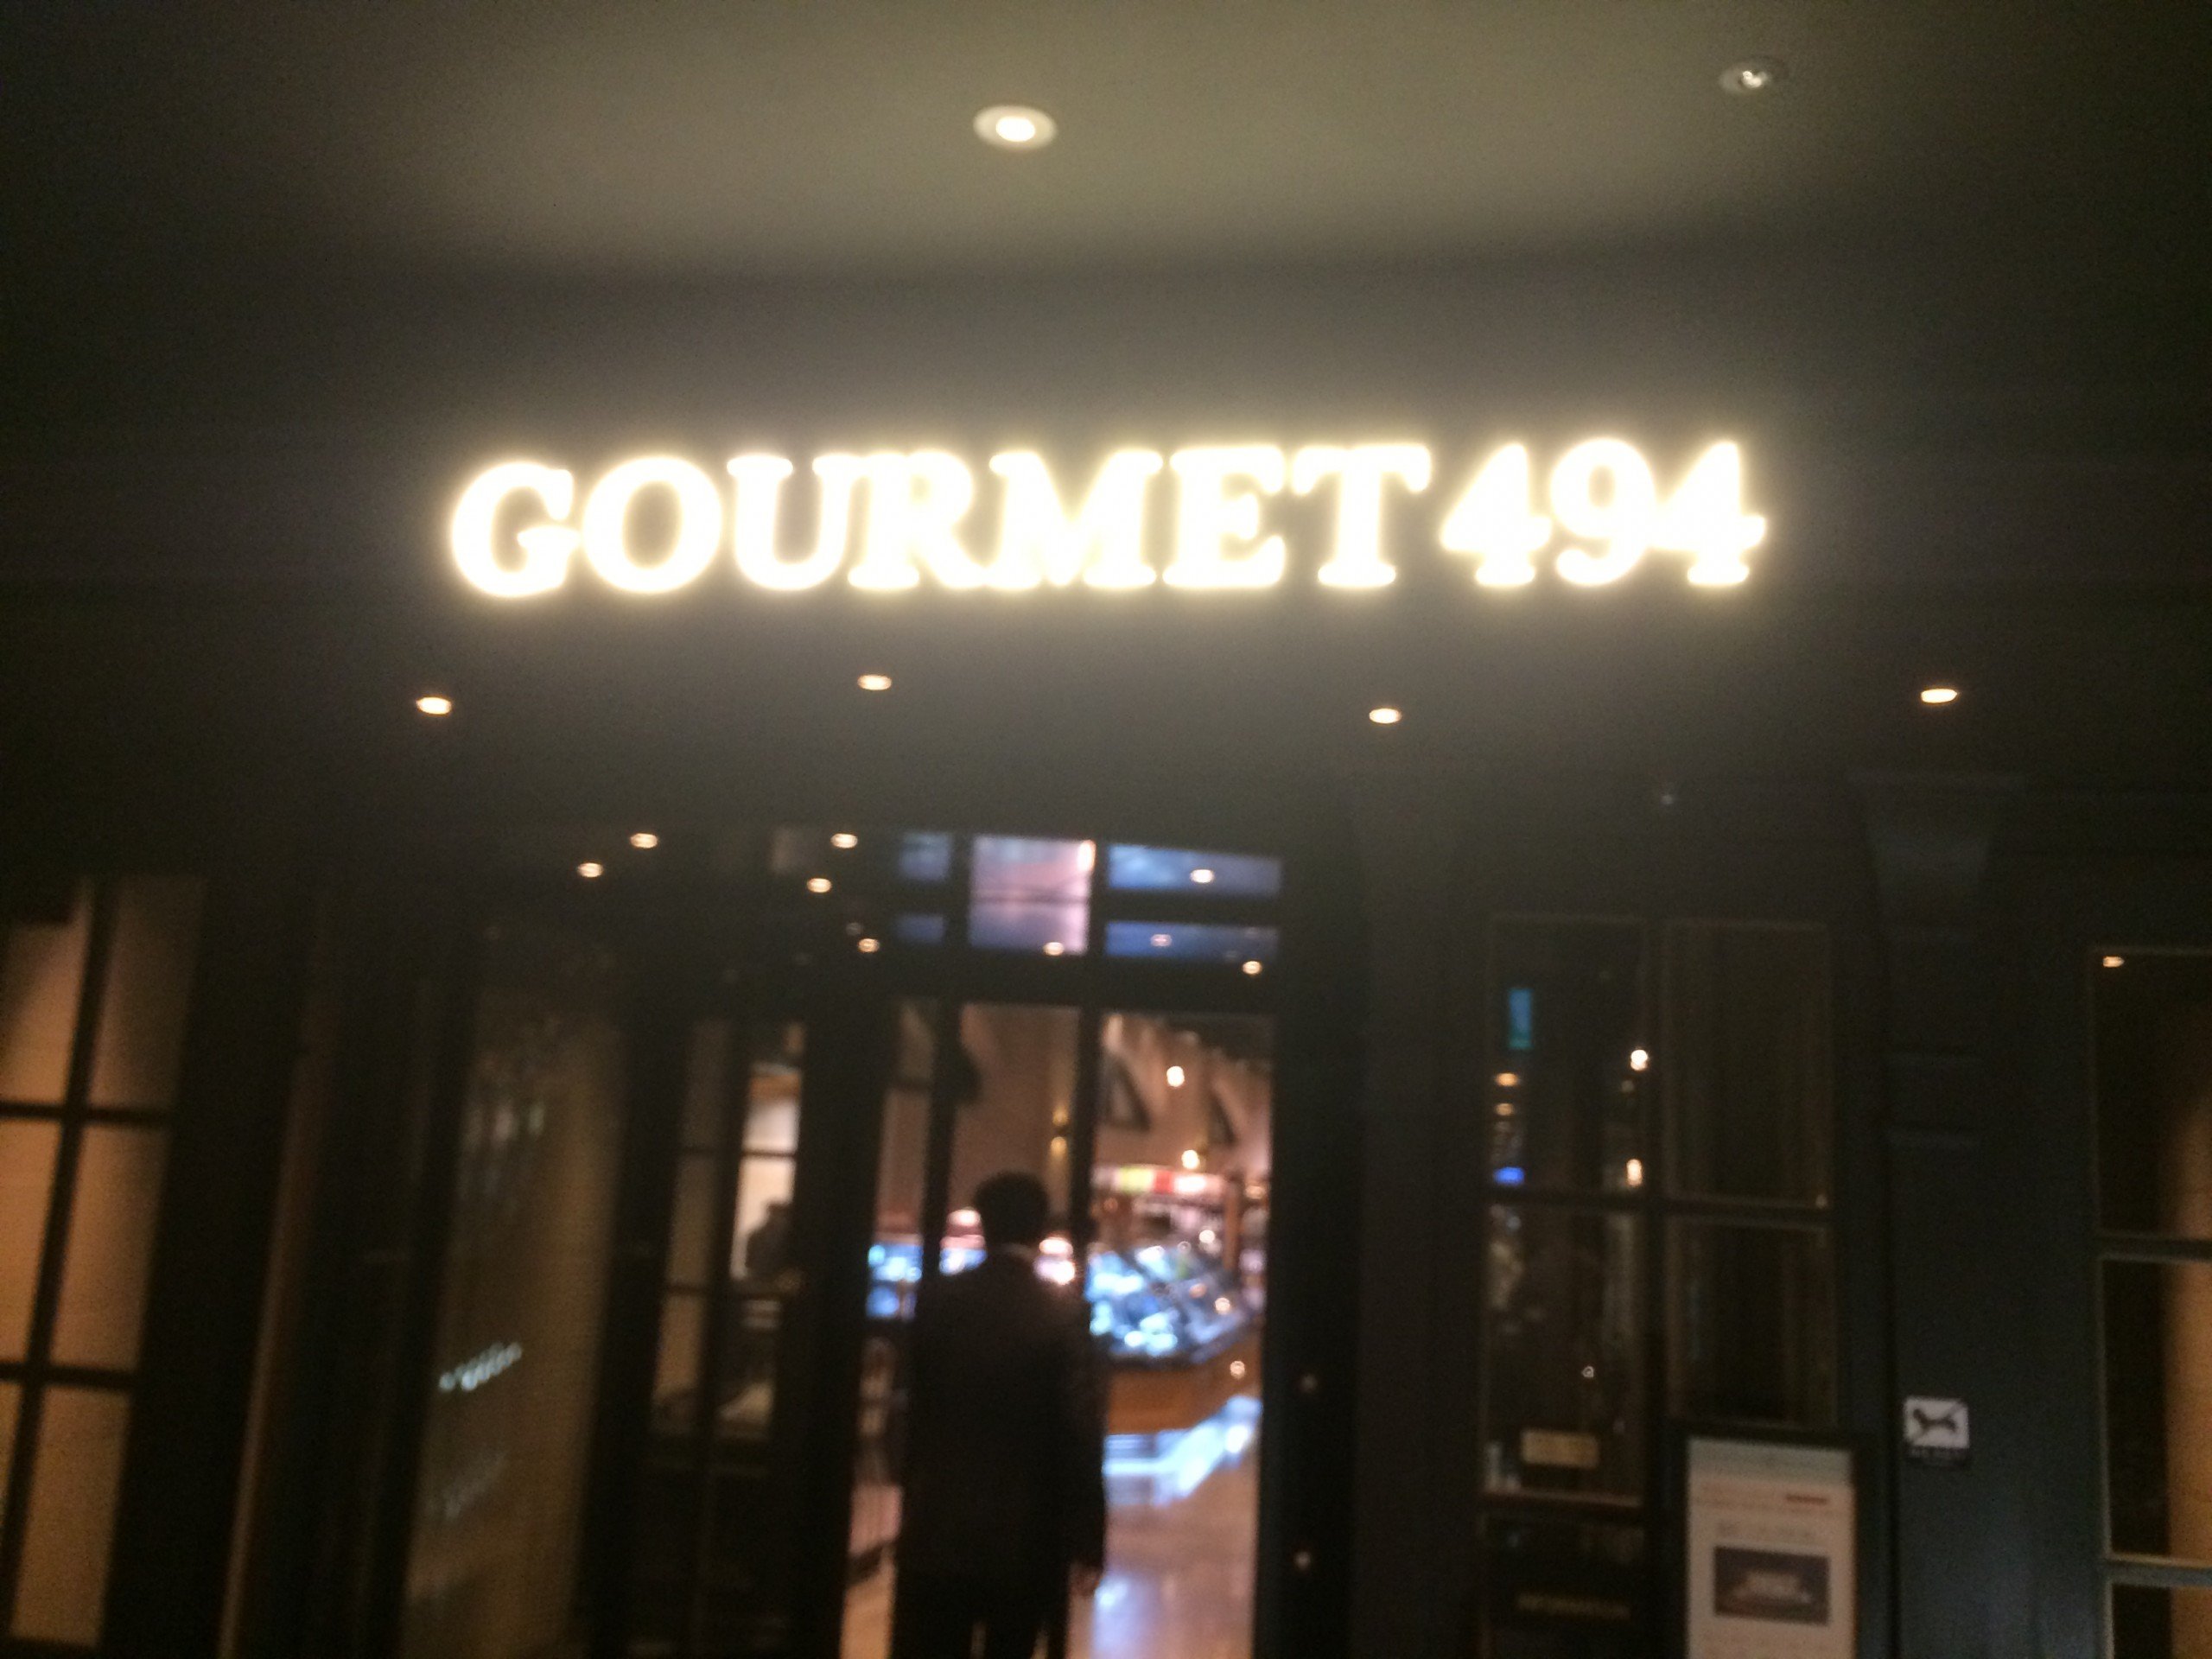 Gourmet 494 is on the ground floor of the Galleria mall